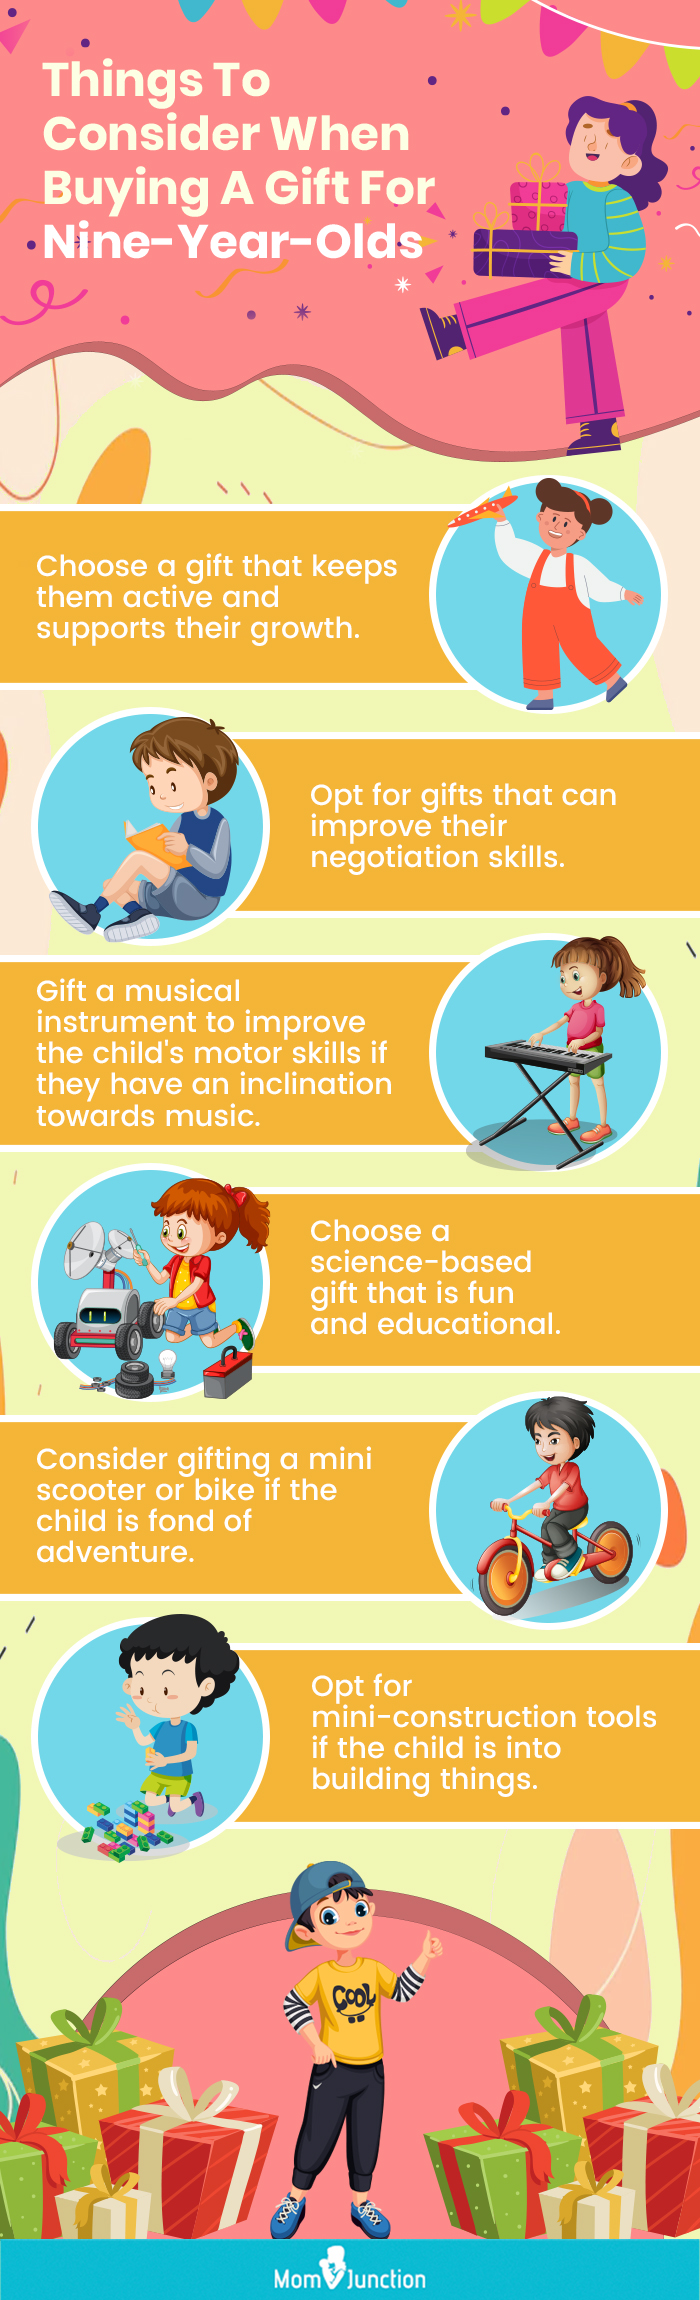 Things To Consider When Buying A Gift For Nine Year Olds (infographic)